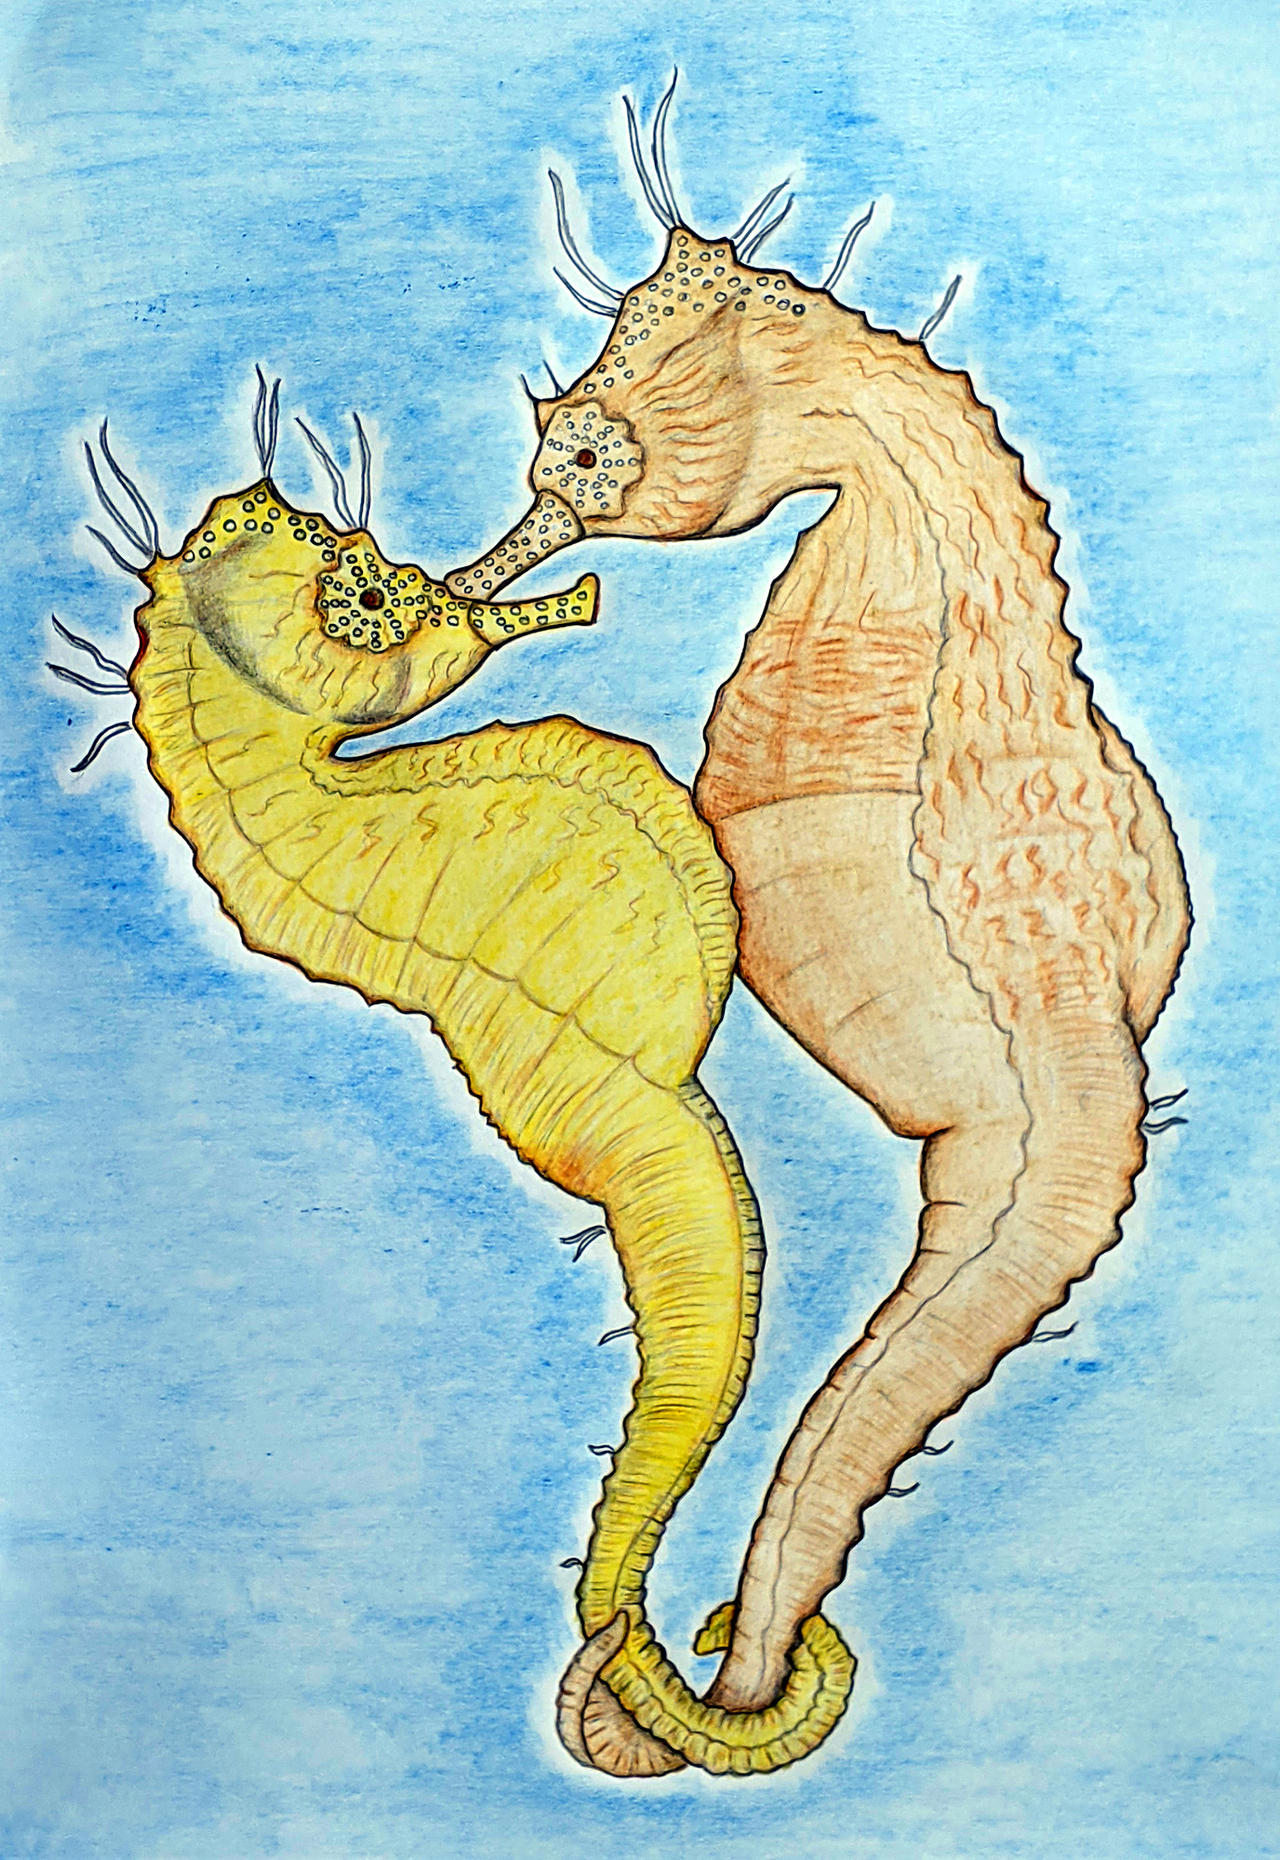 Seahorses Mating by Sofen on DeviantArt